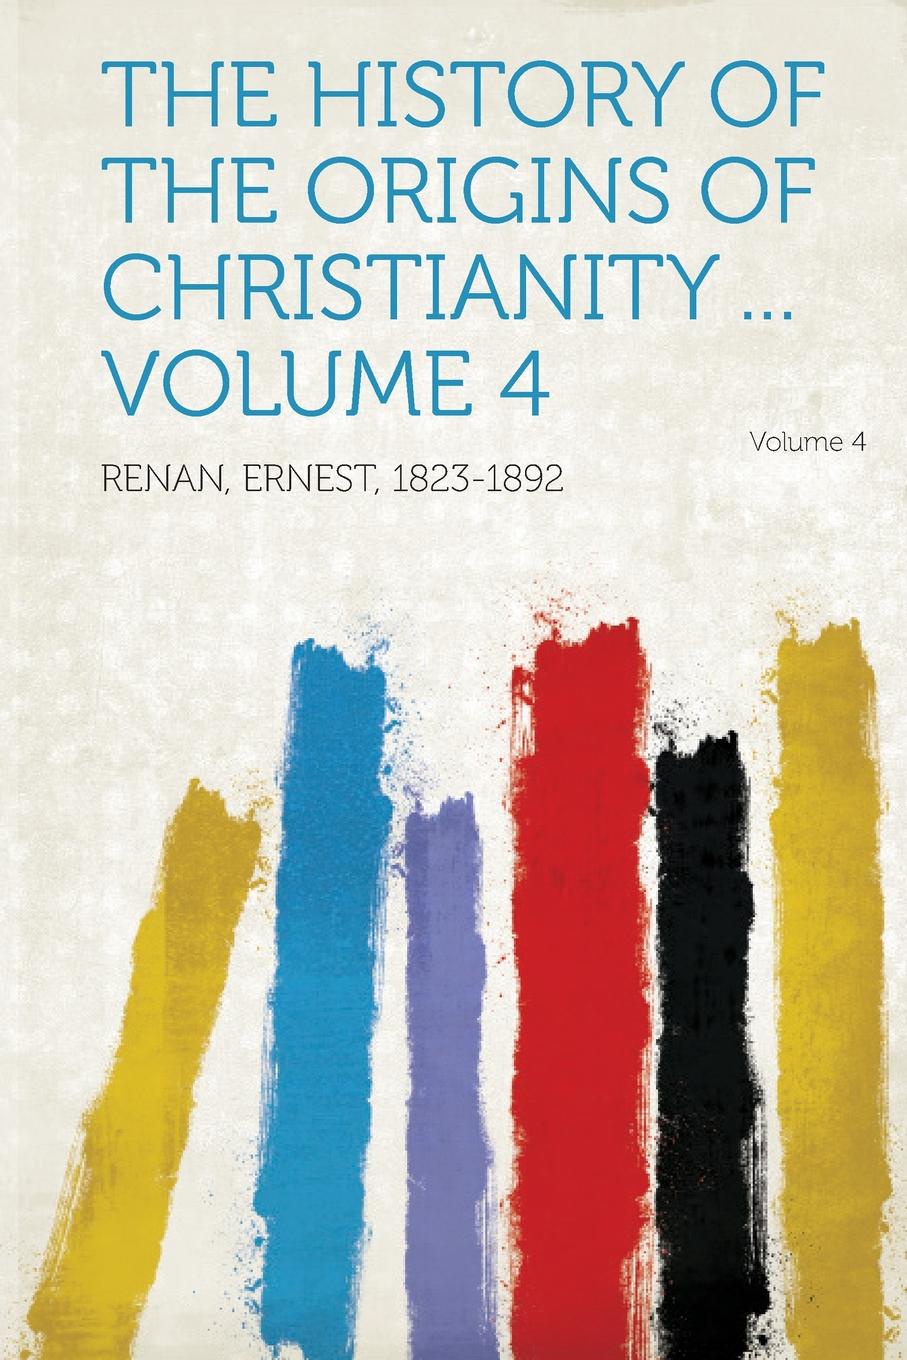 The History of the Origins of Christianity ... Volume 4